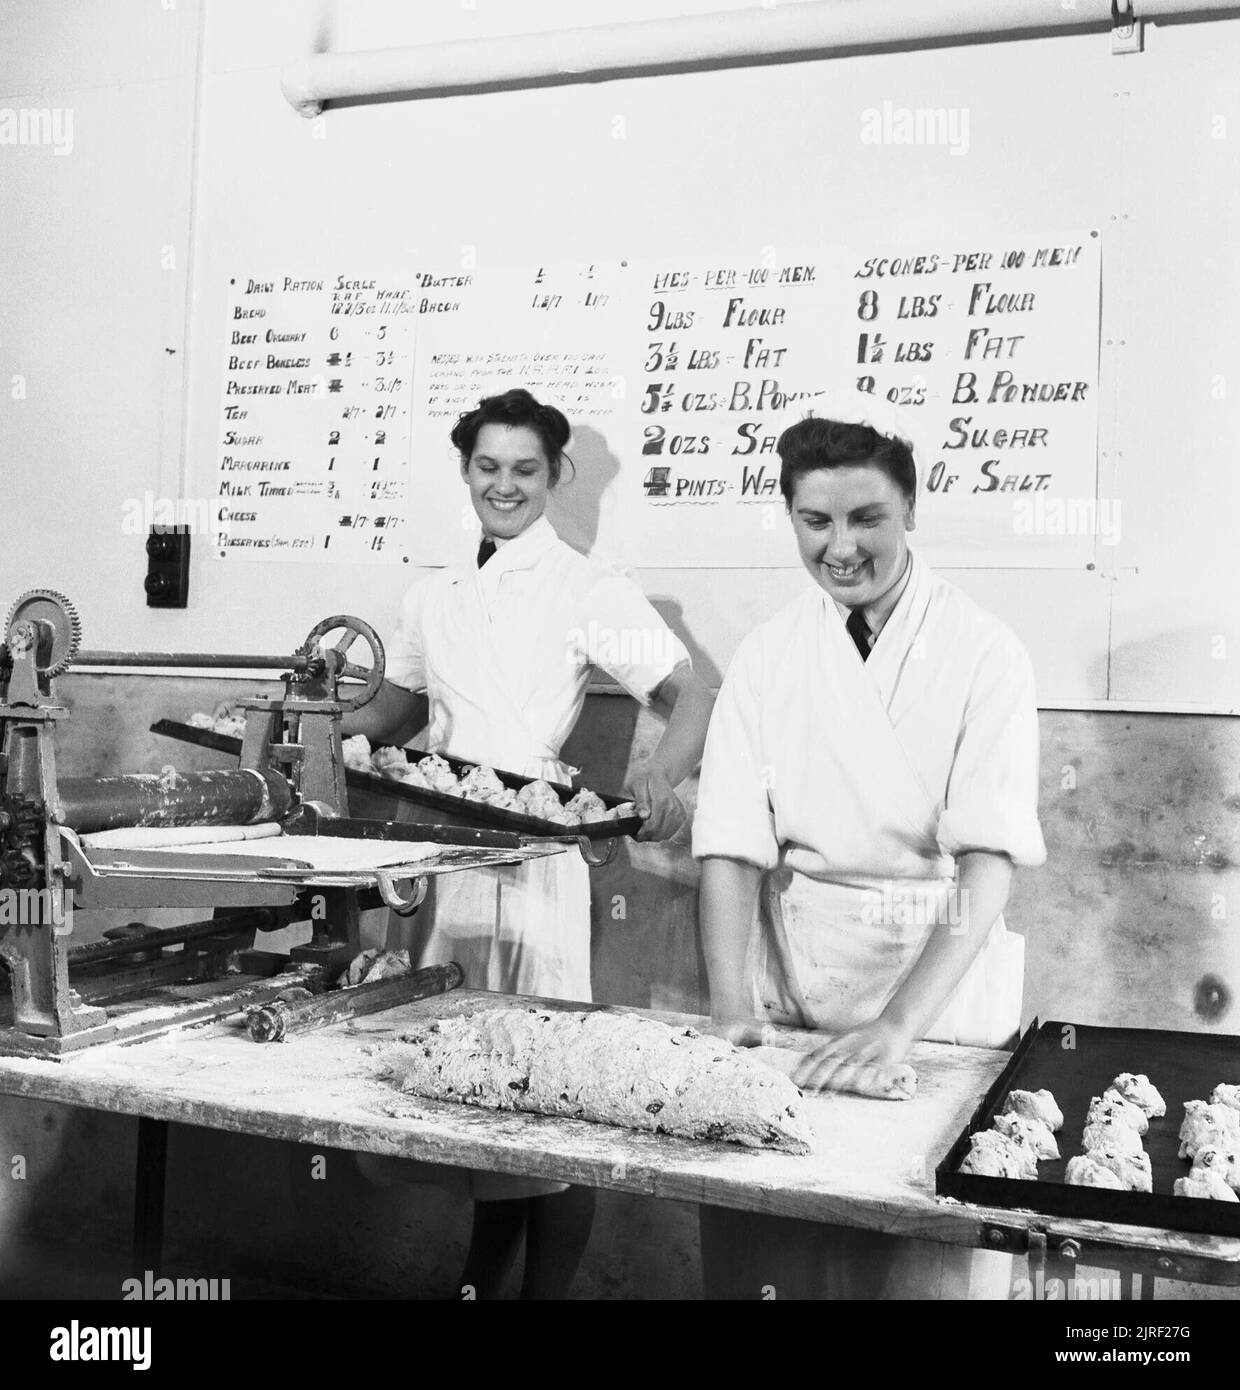 Women's Auxiliary Air Force (WAAF) cooks at work at an RAF station, September 1940. The Women's Auxiliary Air Force (WAAF): Two WAAF cooks at work at a Royal Air Force aerodrome. Pictures behind them are notices bearing recipes for a ?Hundred Pies? and a ?Hundred Scones?. Stock Photo